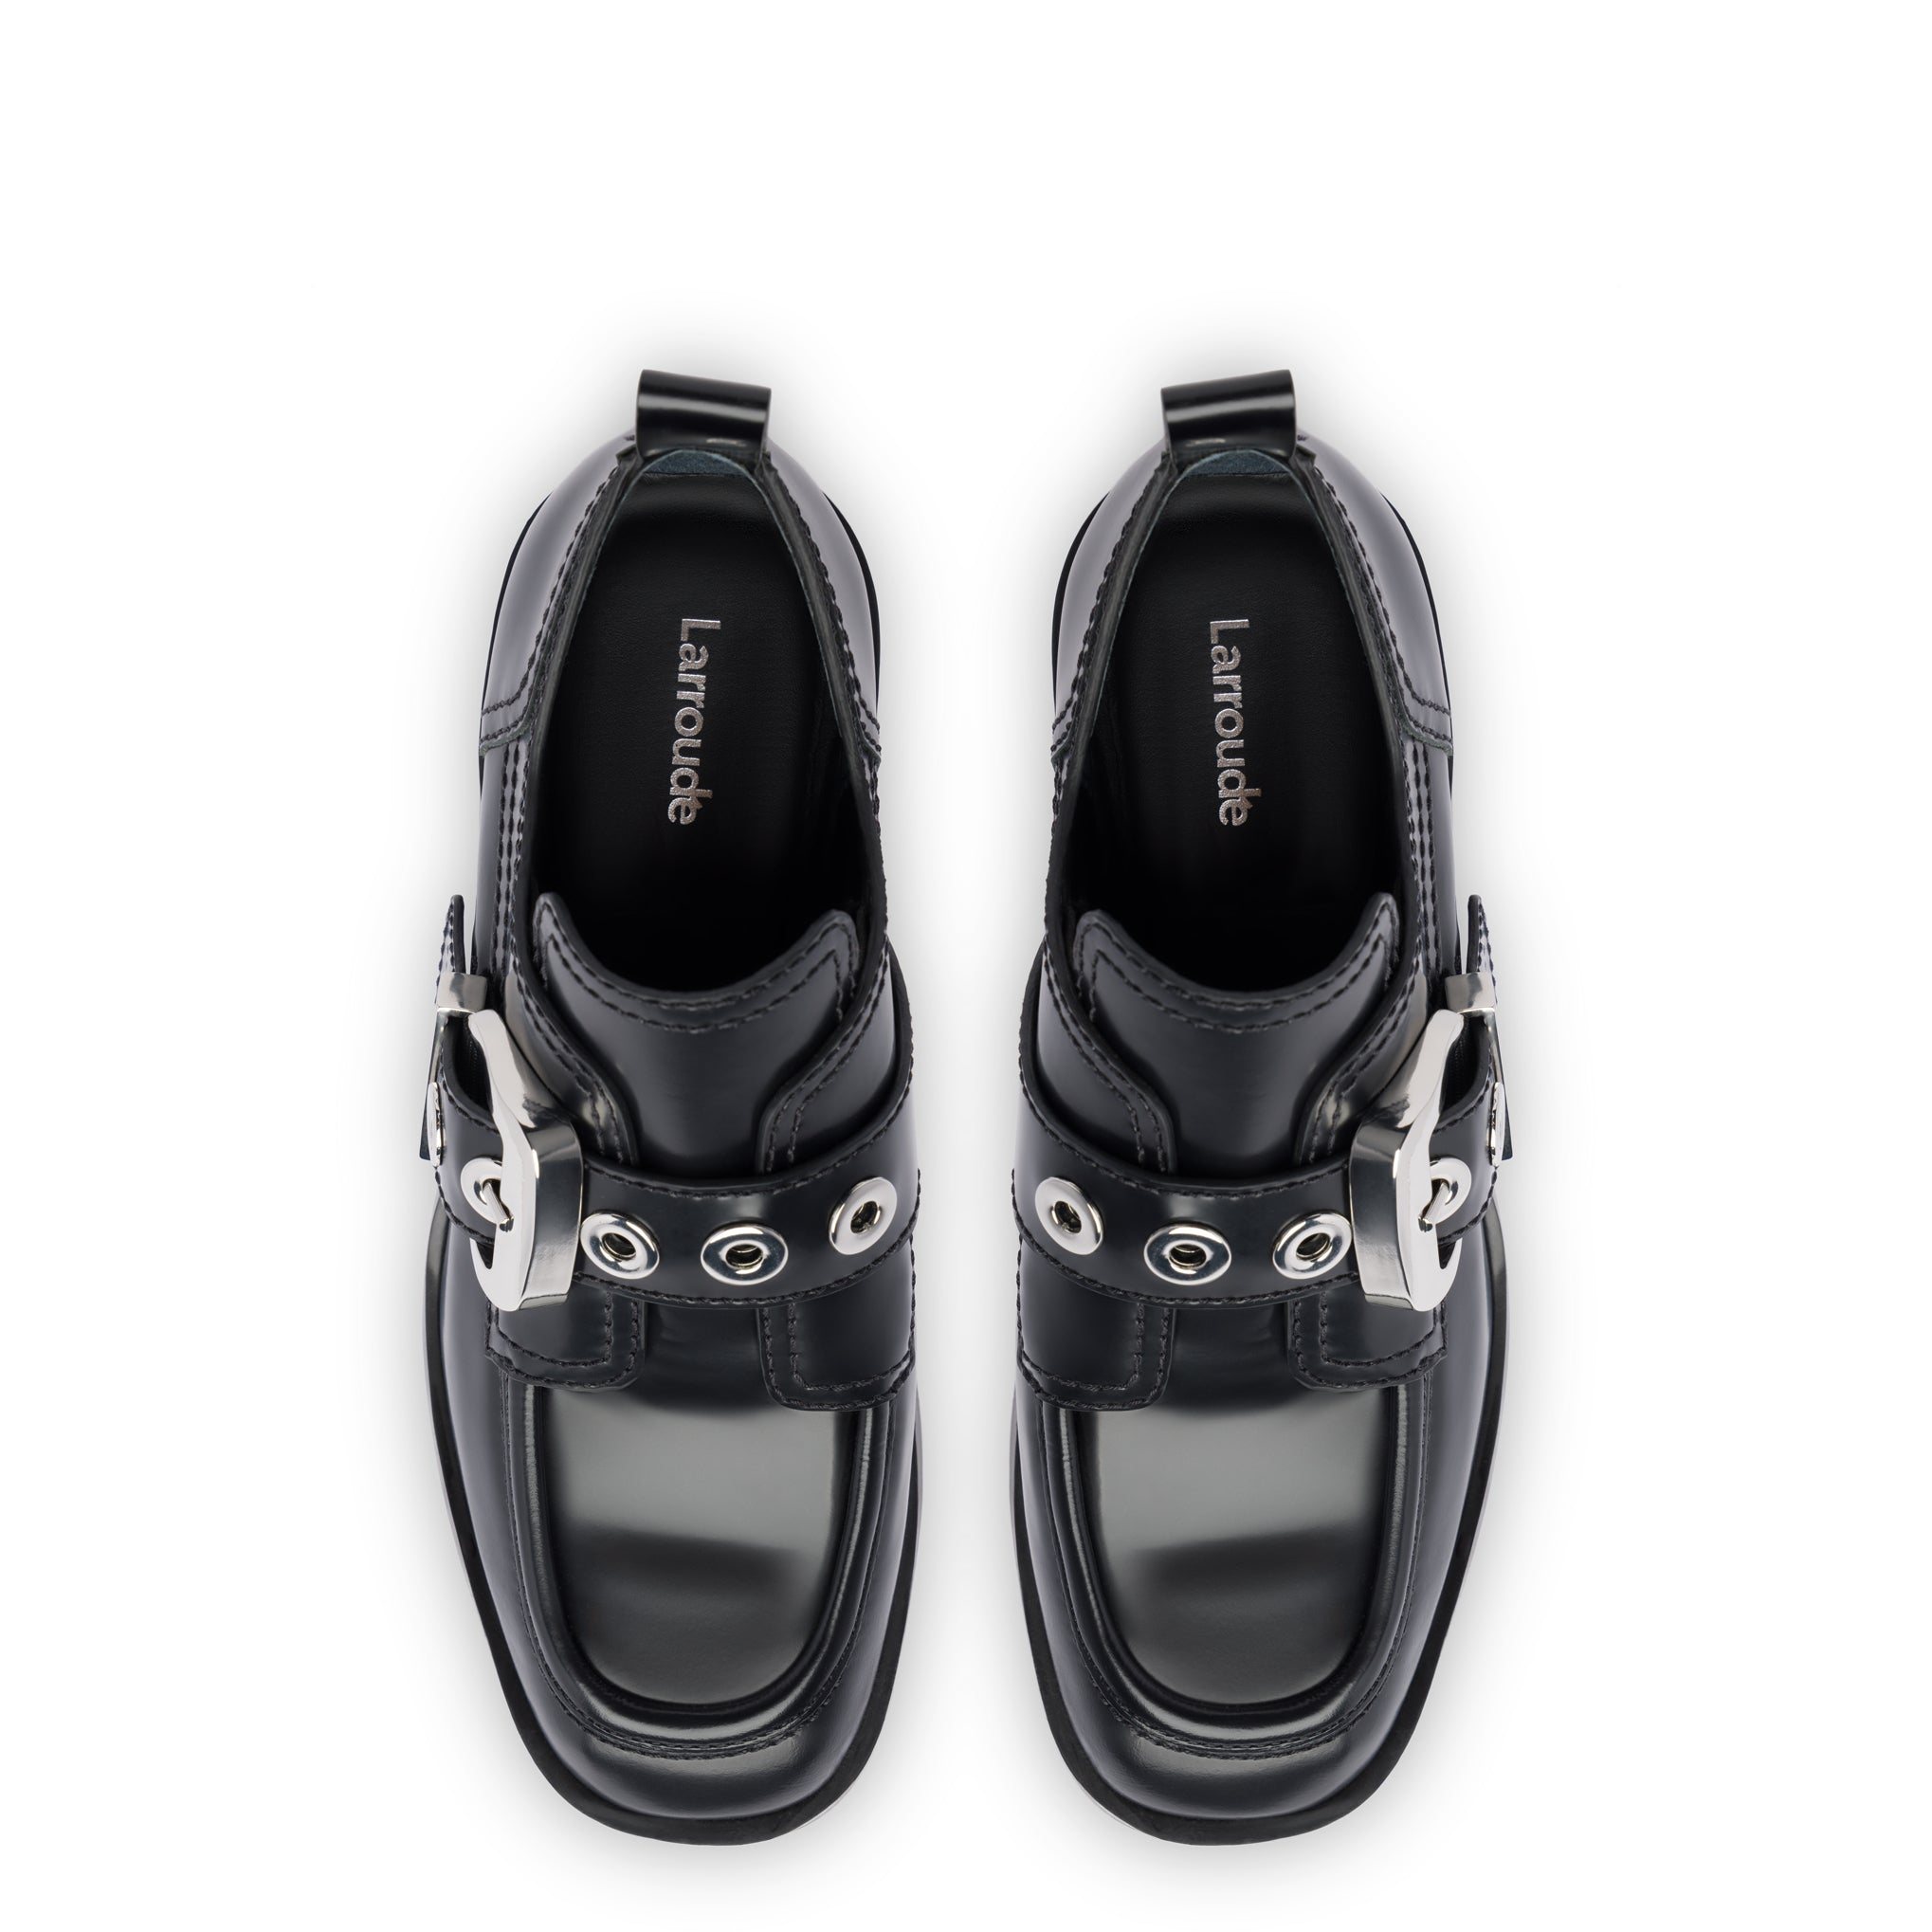 Working Style, Stewart Black Patent Leather Dinner Shoes